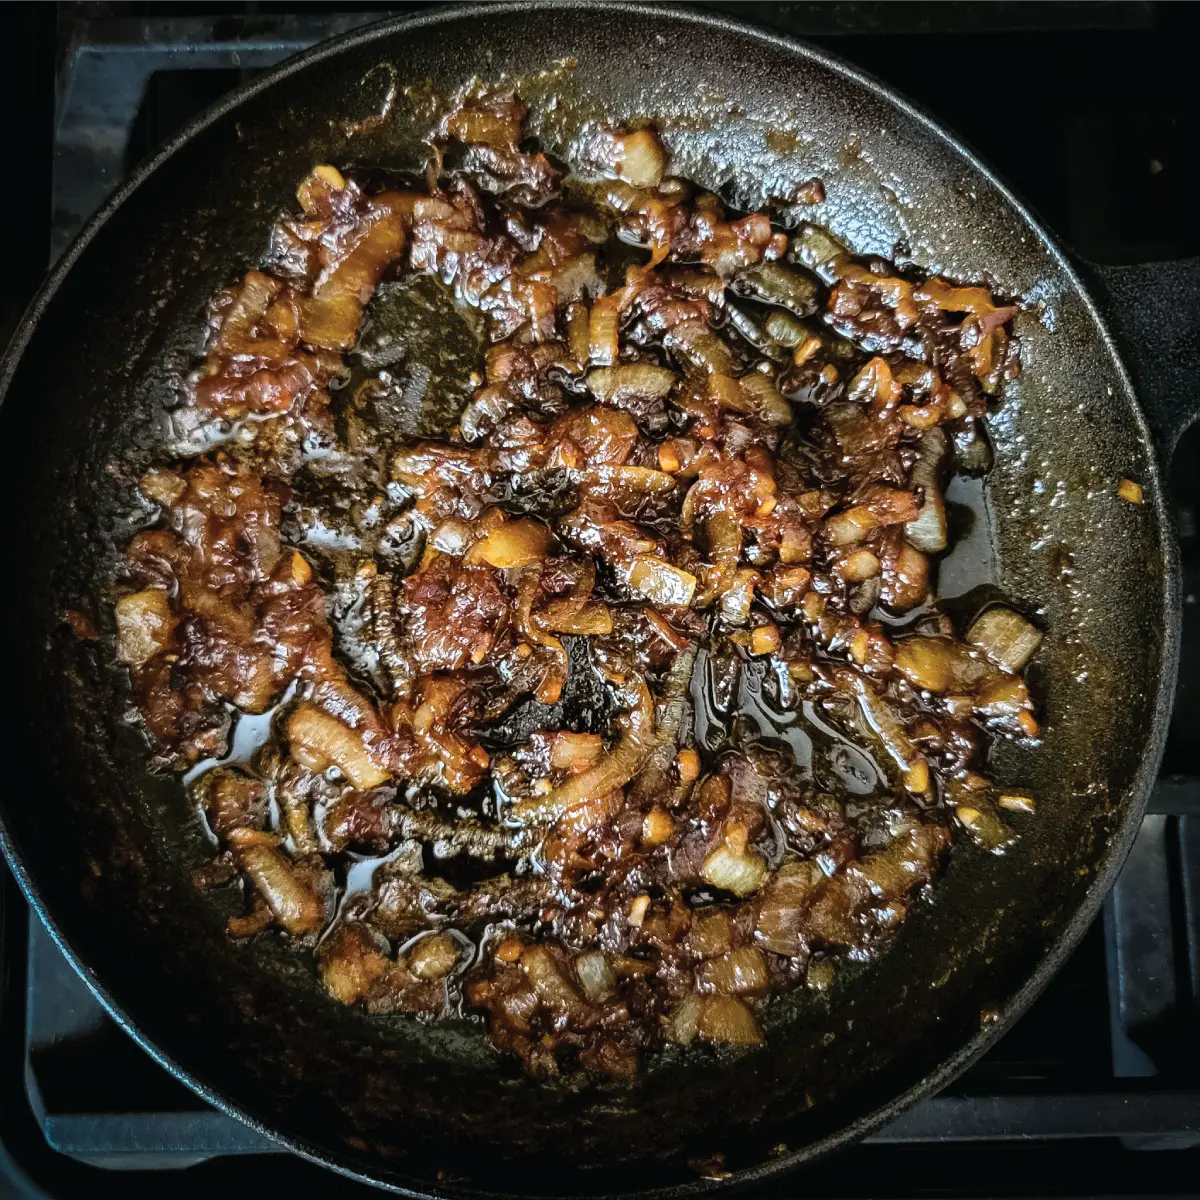 Onions caramelized with Jack Daniel's in a frying pan after removing from heat.